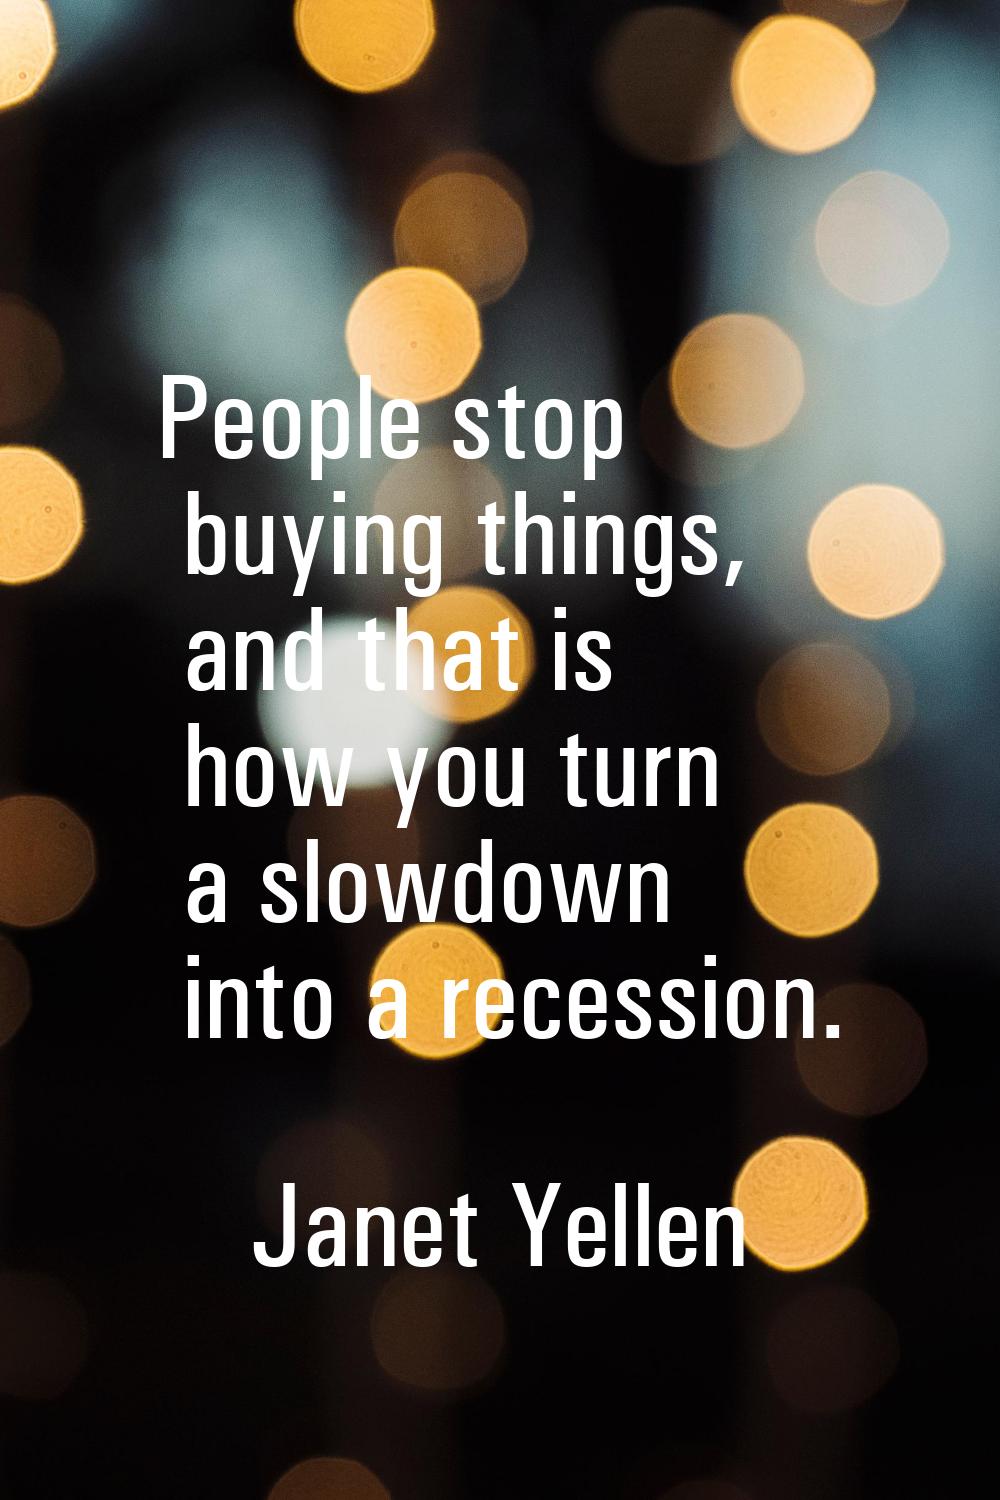 People stop buying things, and that is how you turn a slowdown into a recession.